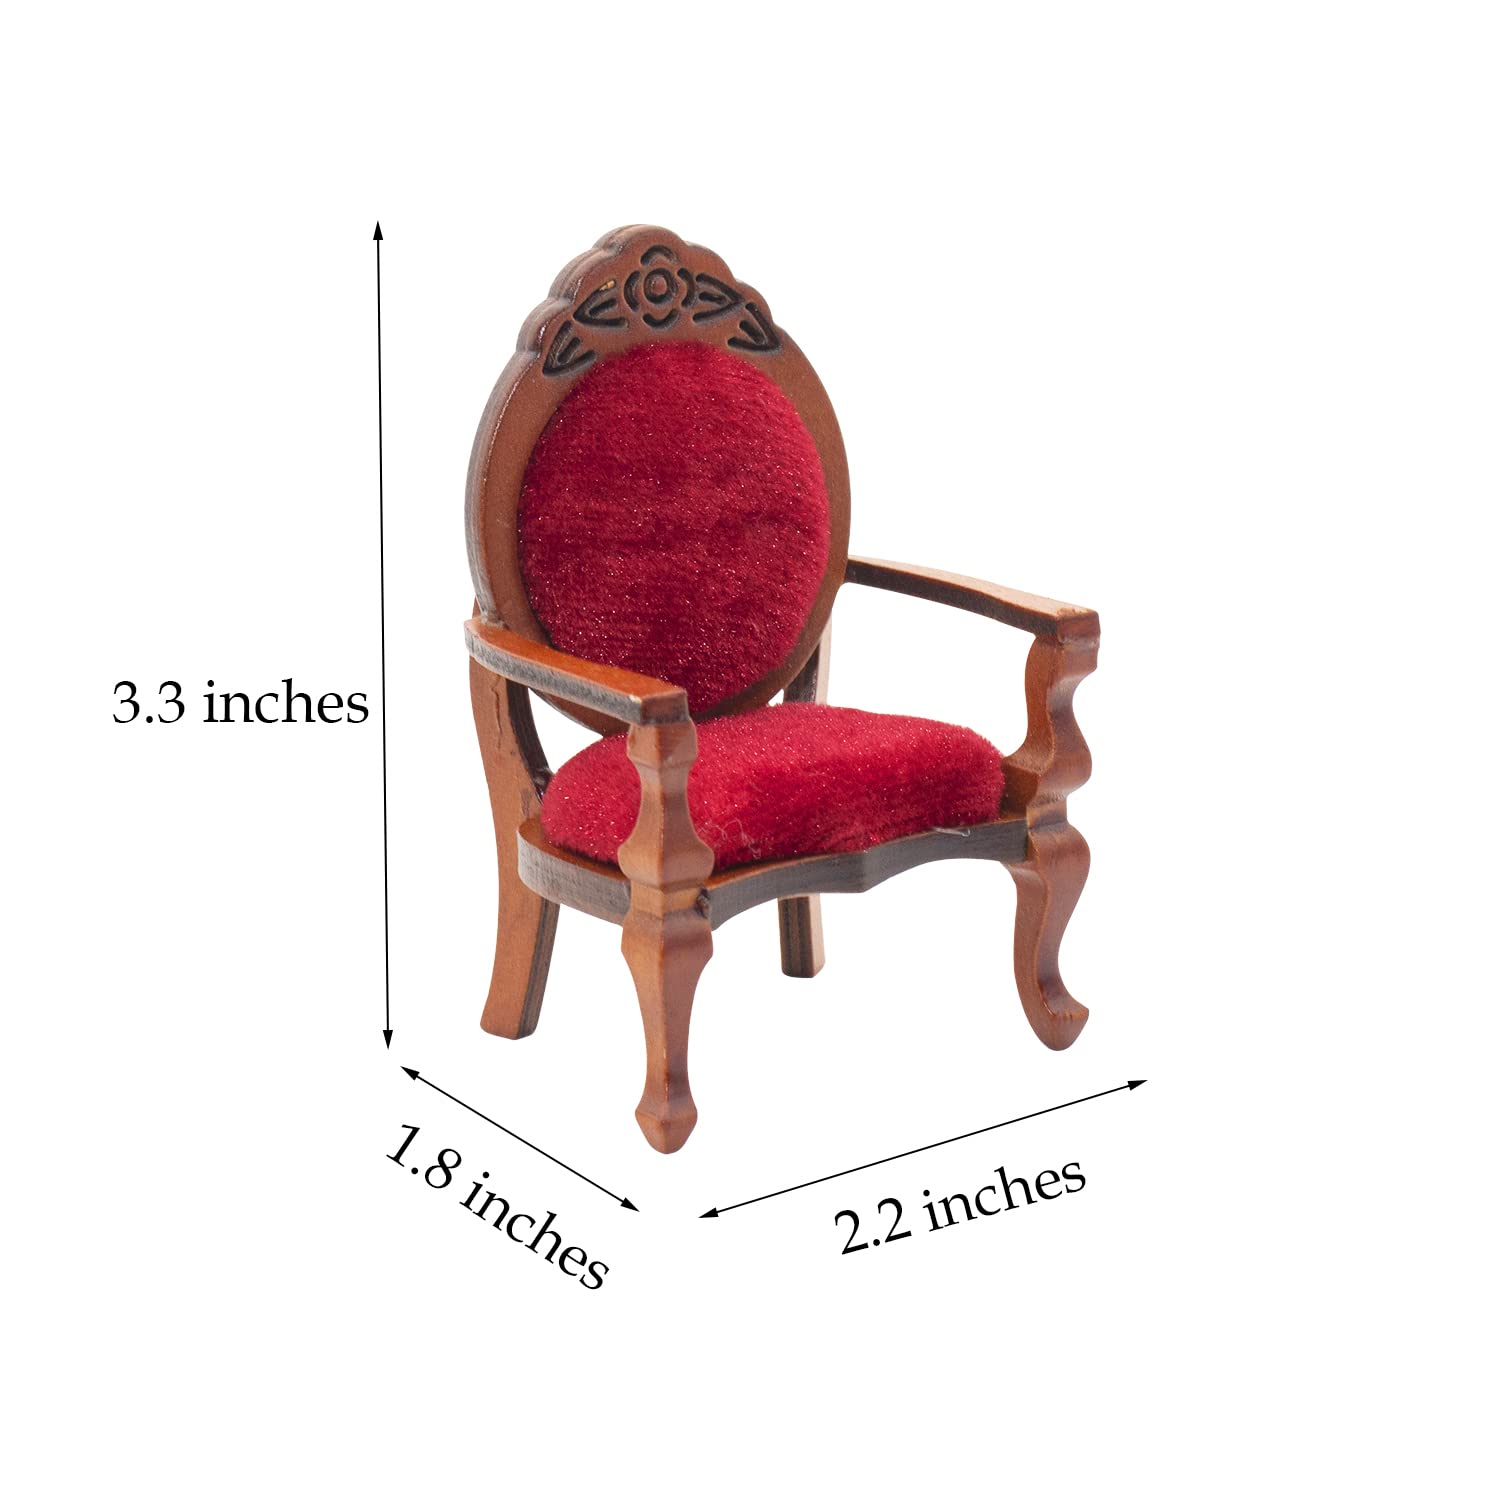 2 PCS 1:12 Miniature House Furniture Wooden Carved Single Sofa Chairs Vintage Red Armchairs for Miniature House Accessories Furniture Decoration Birthday